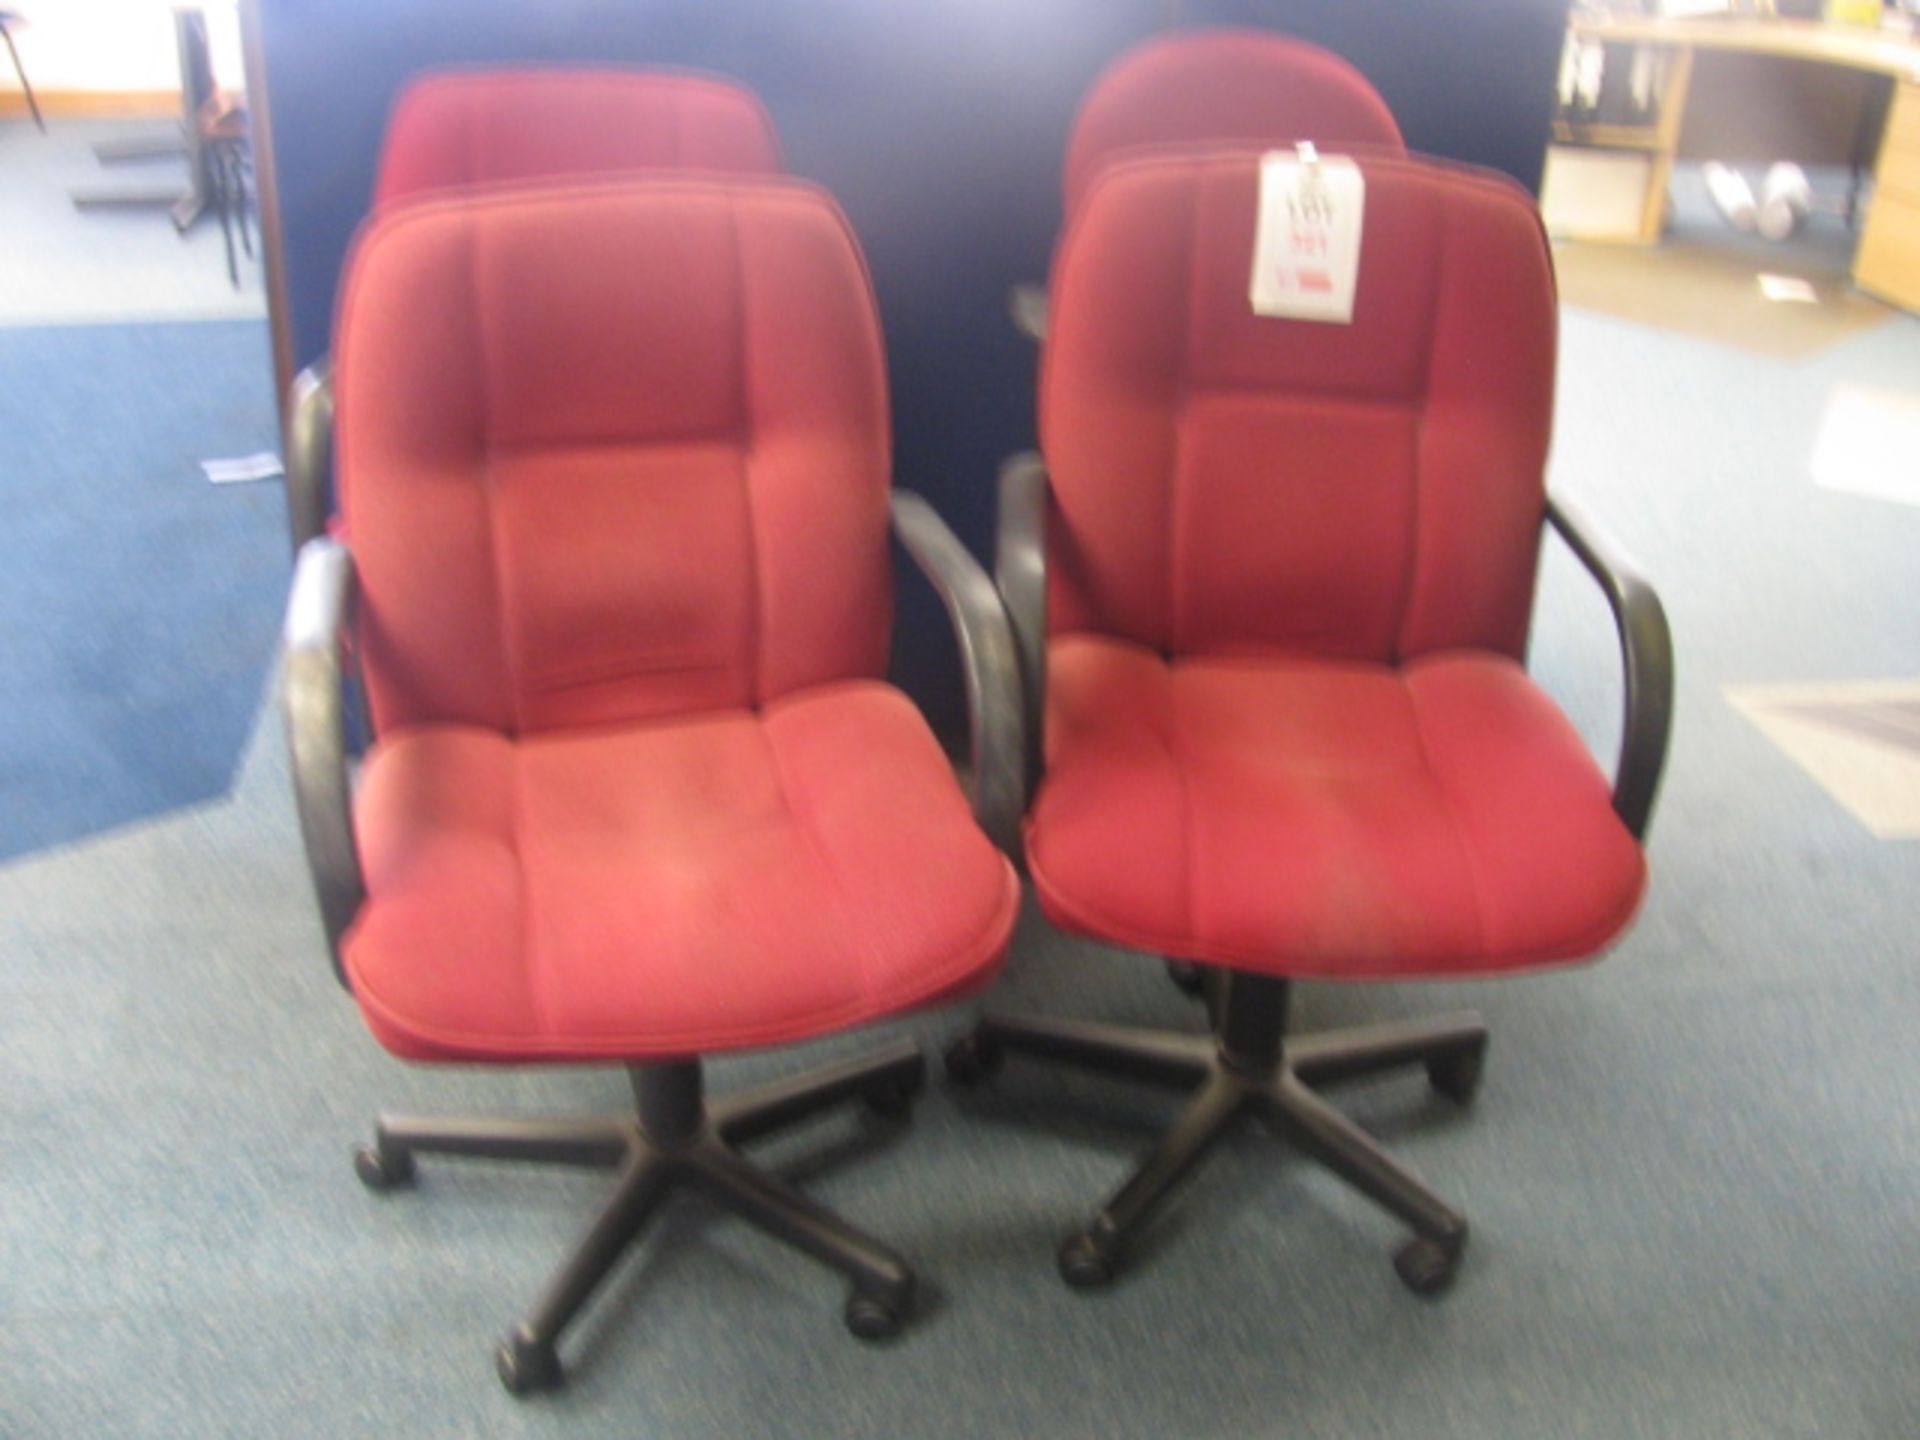 4 red fabric upholstered chairs